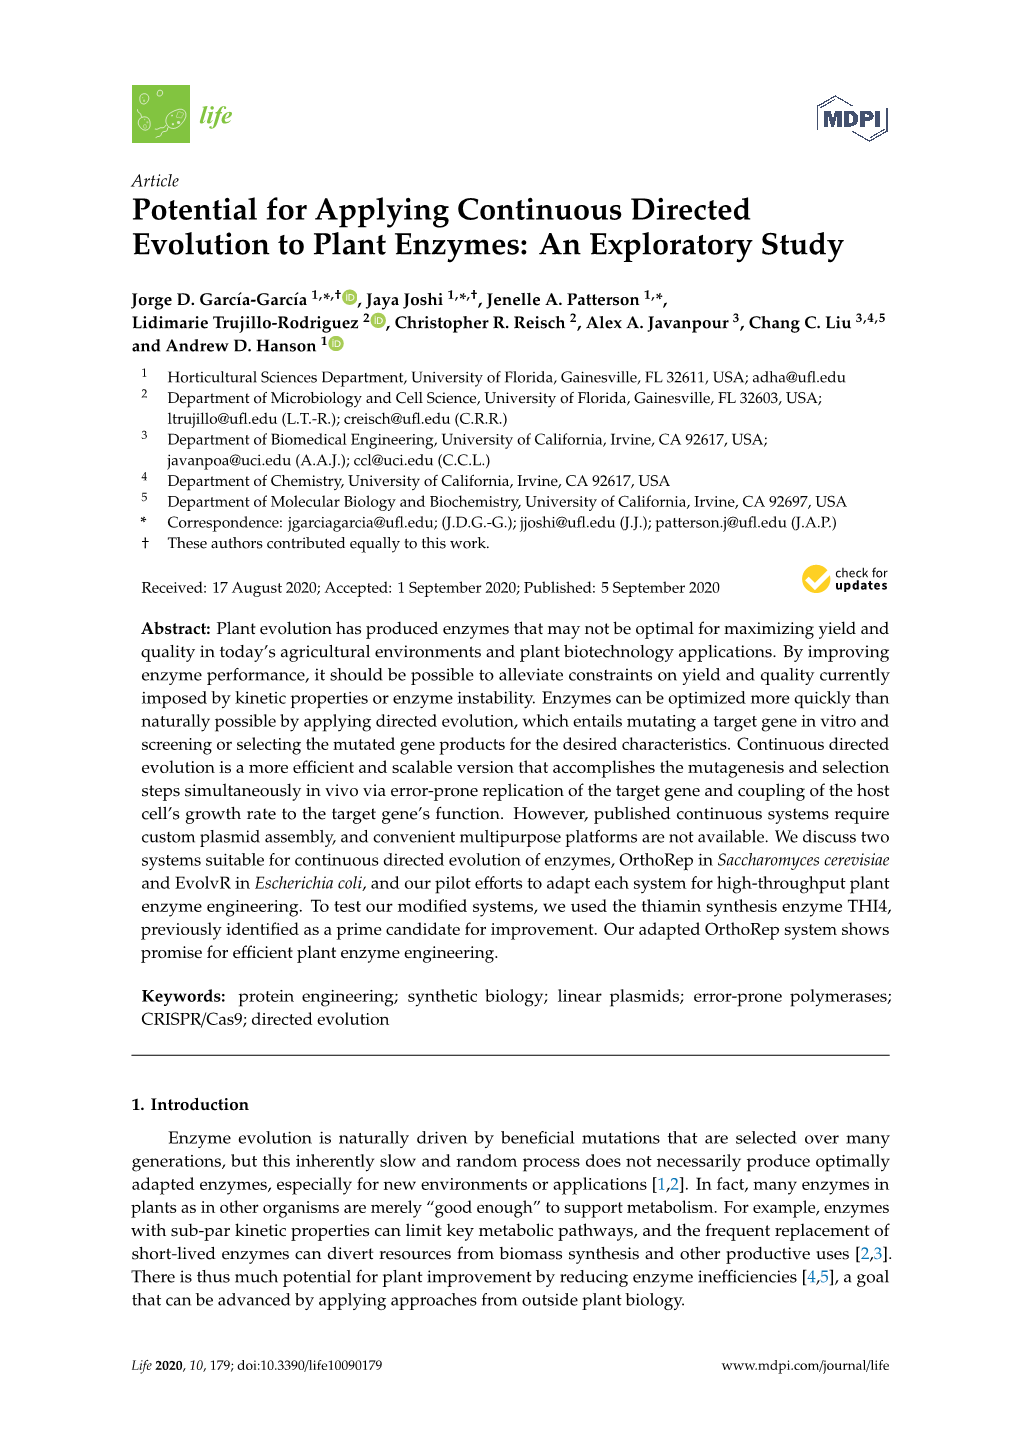 Potential for Applying Continuous Directed Evolution to Plant Enzymes: an Exploratory Study